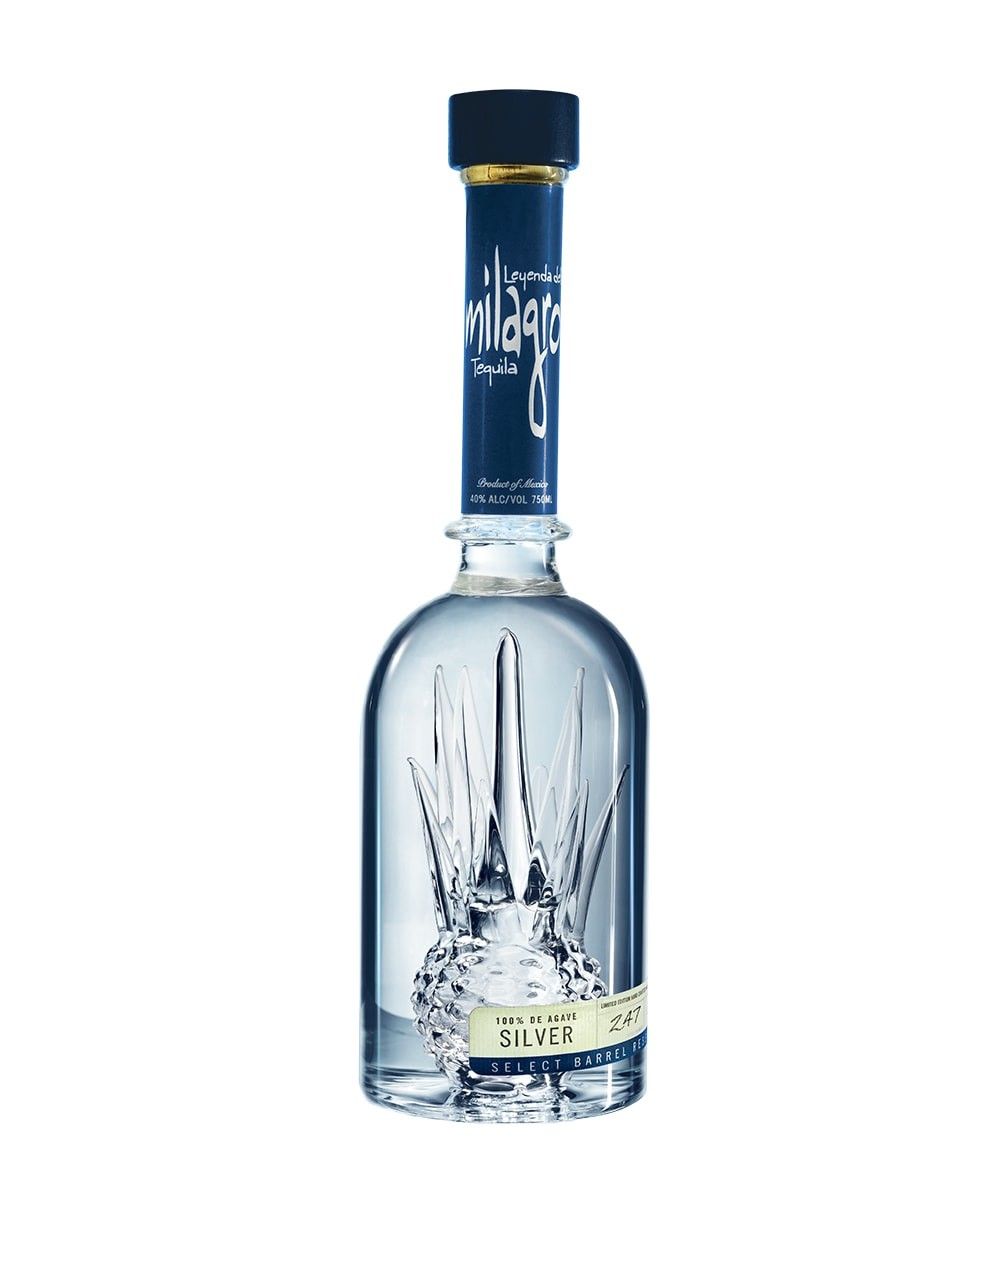 Milagro Select Barrel Reserve Silver Tequila